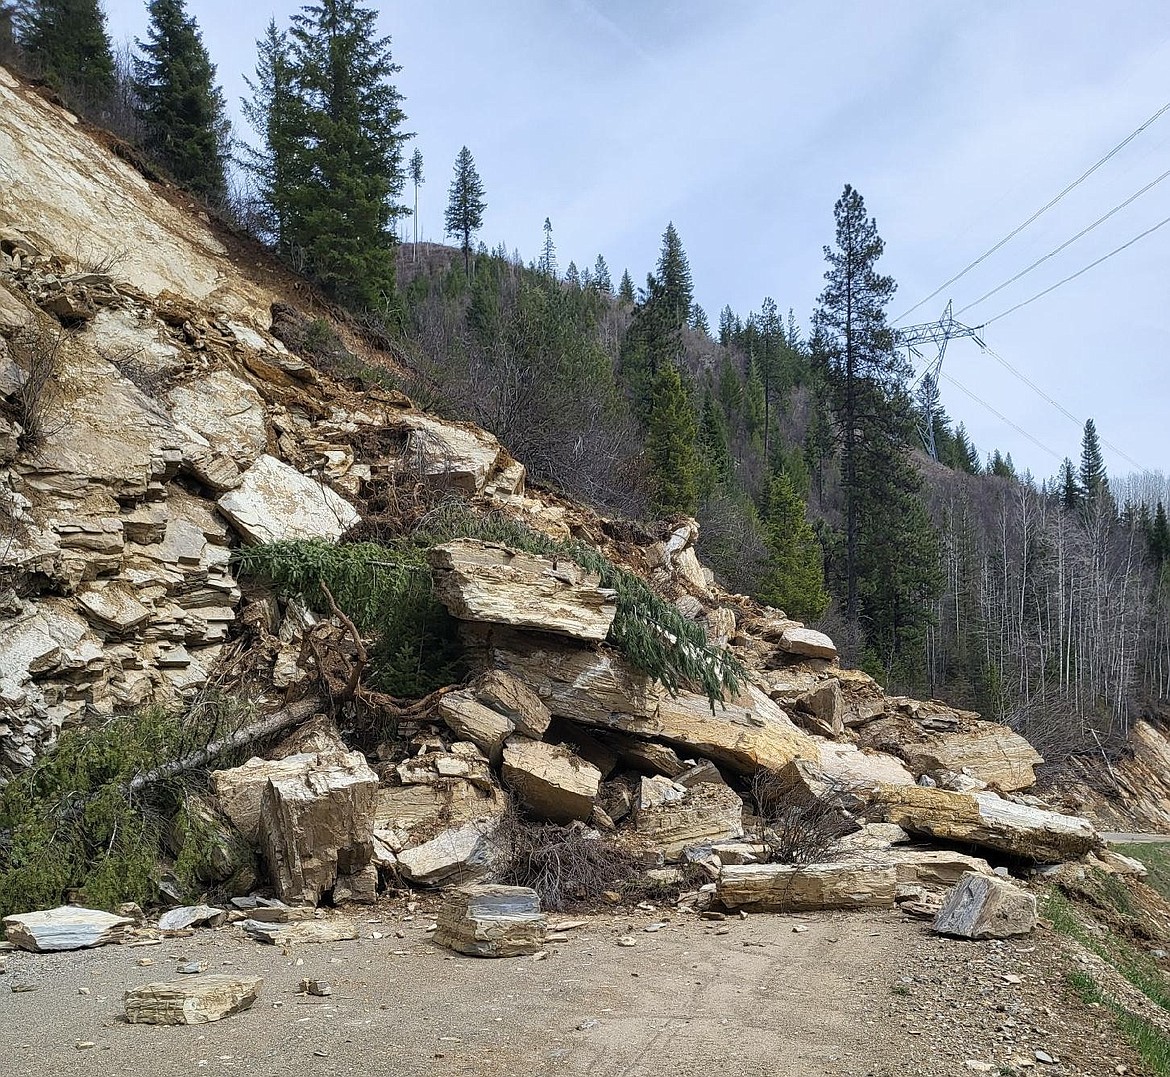 A massive rockslide on Moon Pass blocked the road completely in April. The debris from the slide has been cleared, but must now be crushed before it can be used to repair the road.